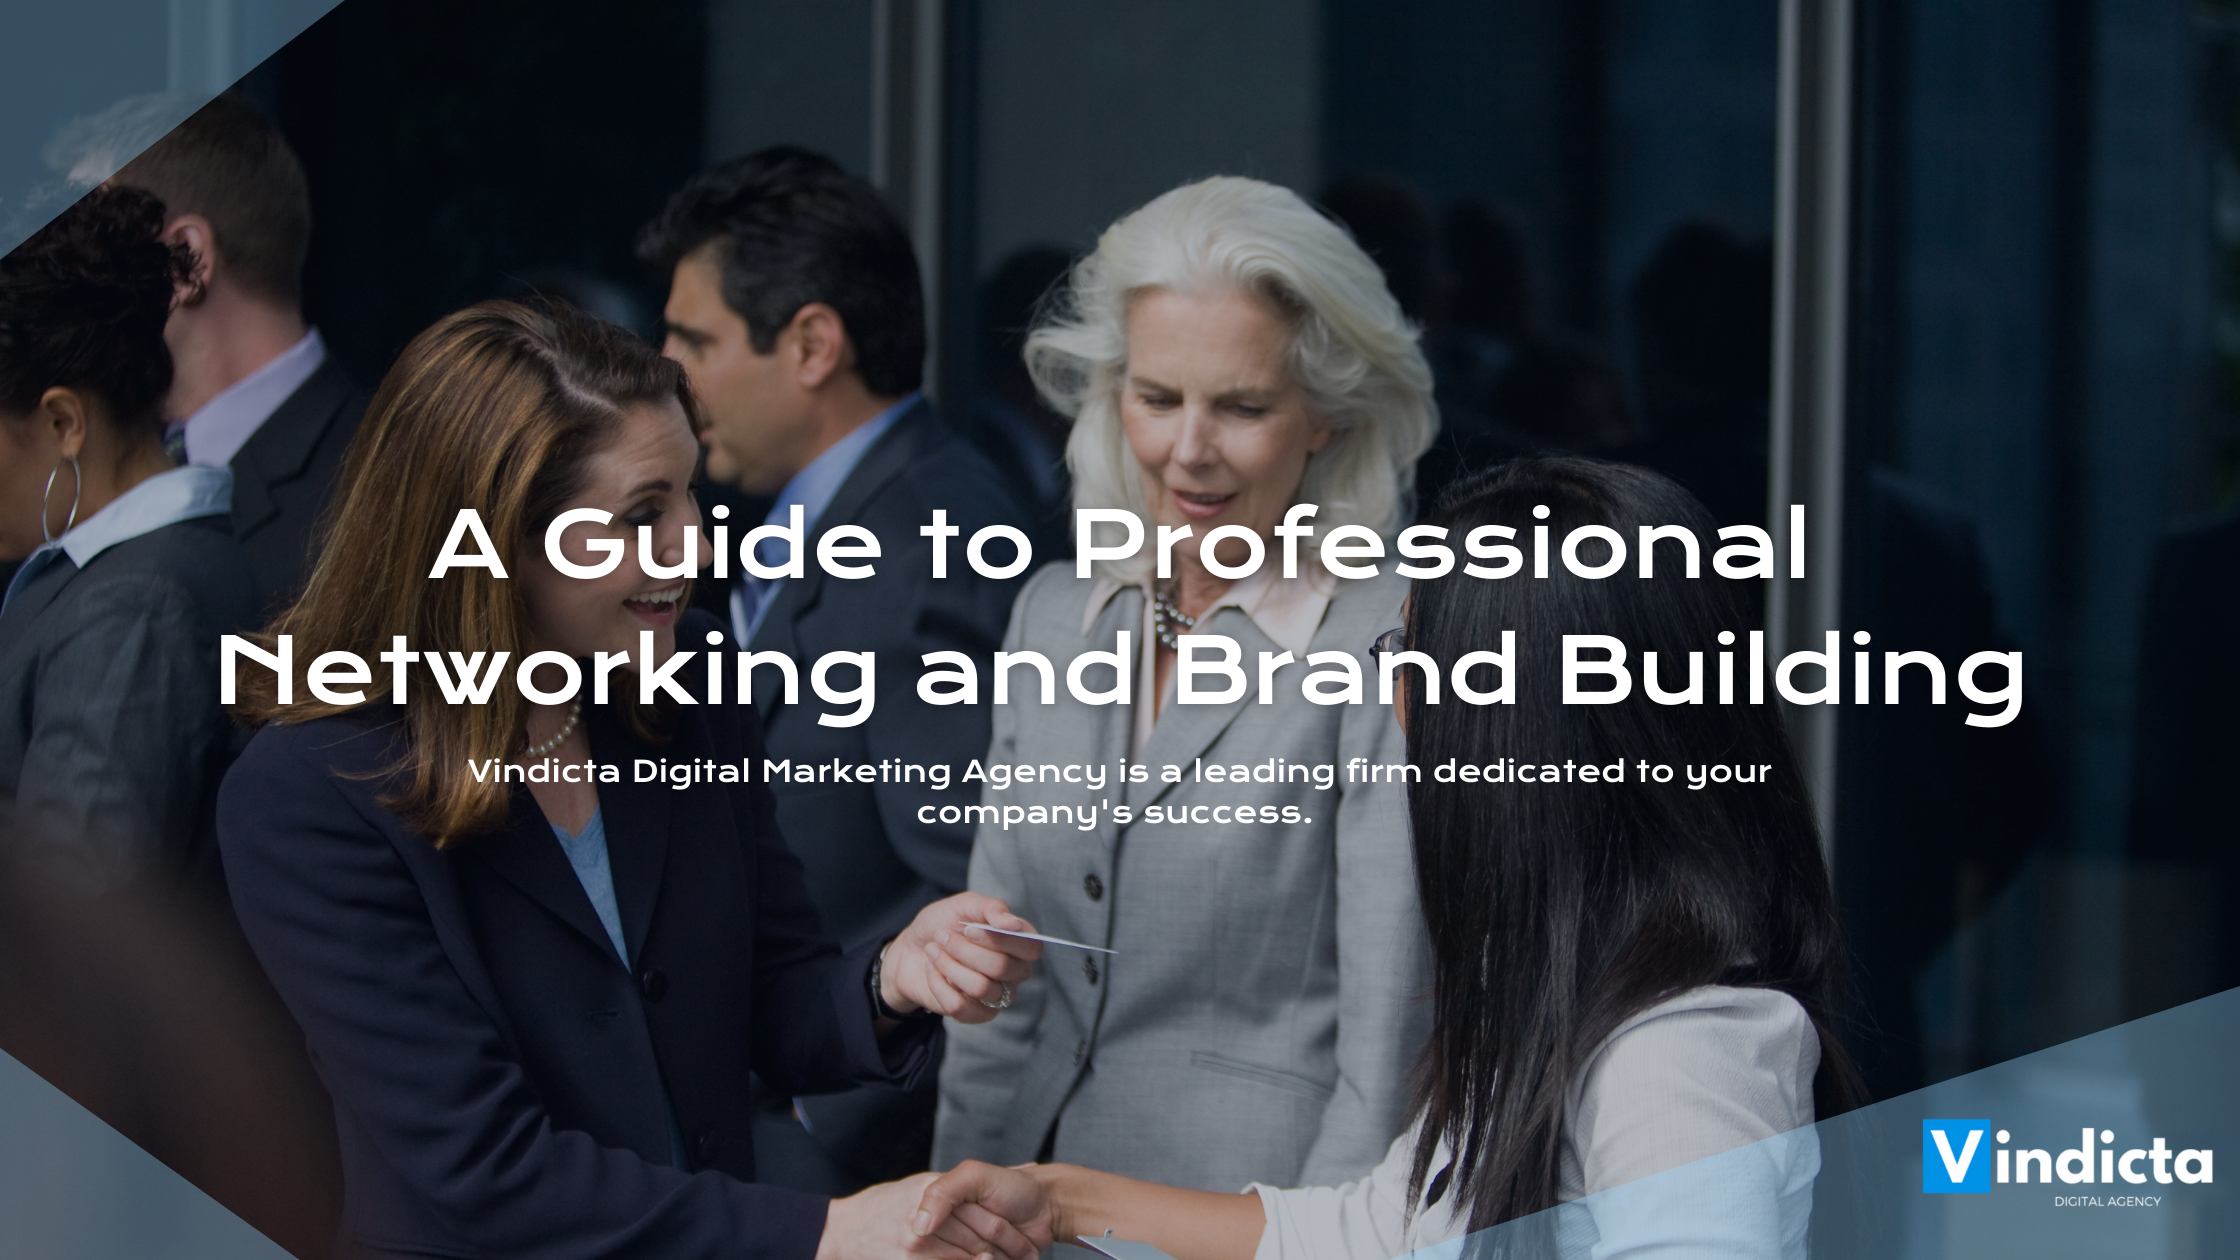 A Guide to Professional Networking and Brand Building